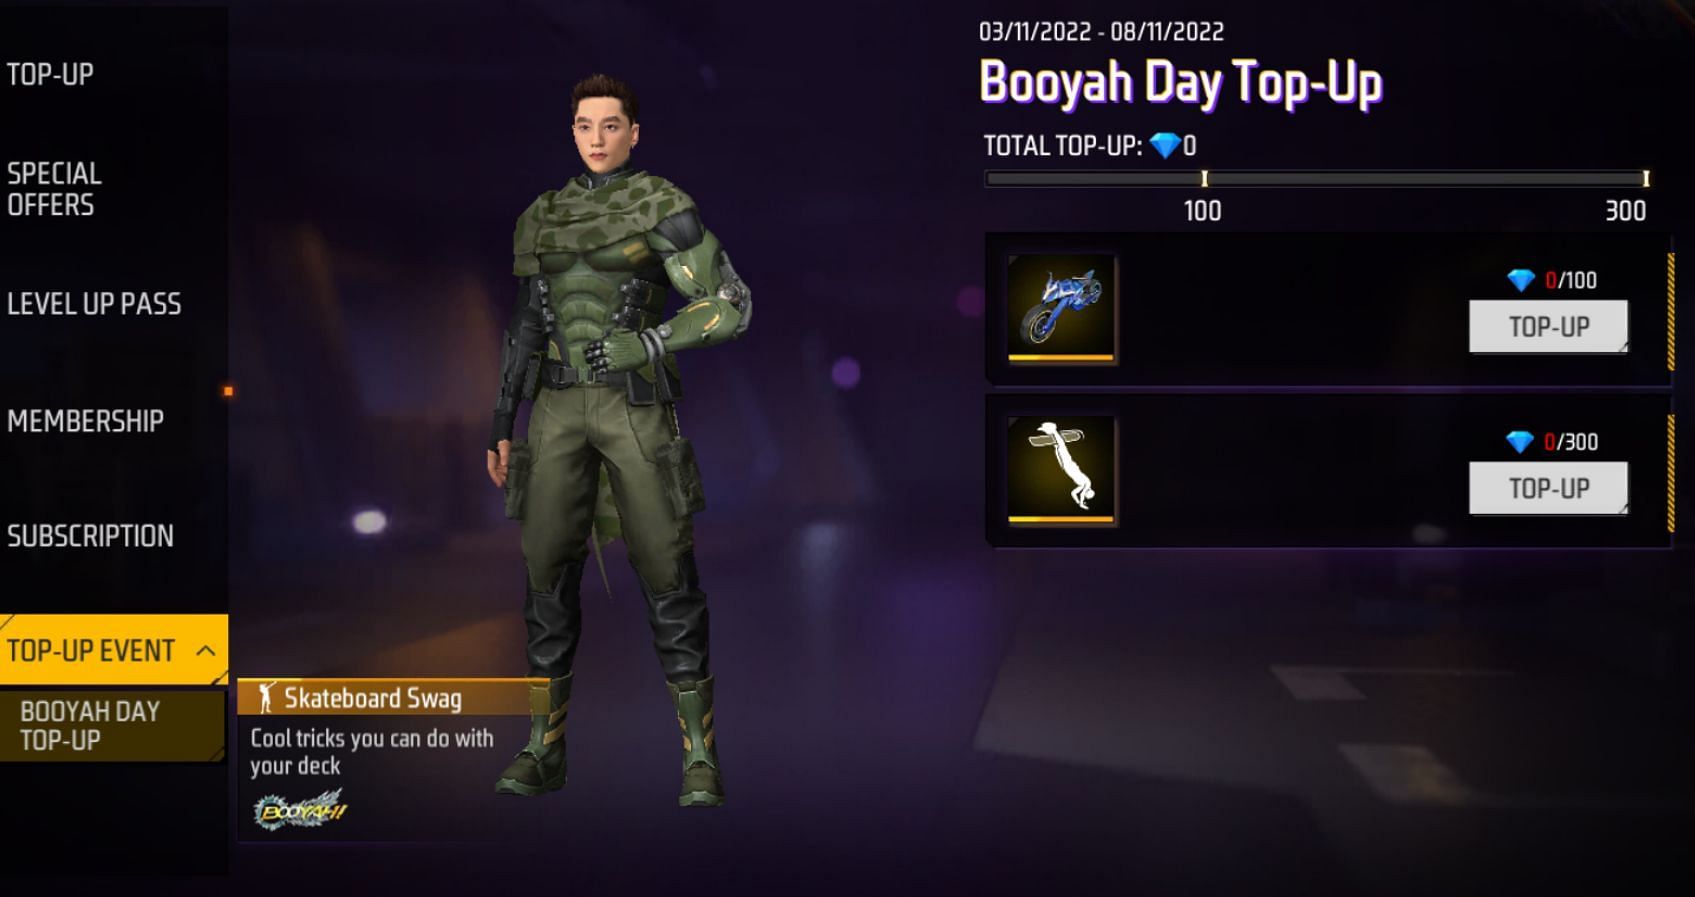 Free Fire Celebrates Booyah Day 2022 This Weekend